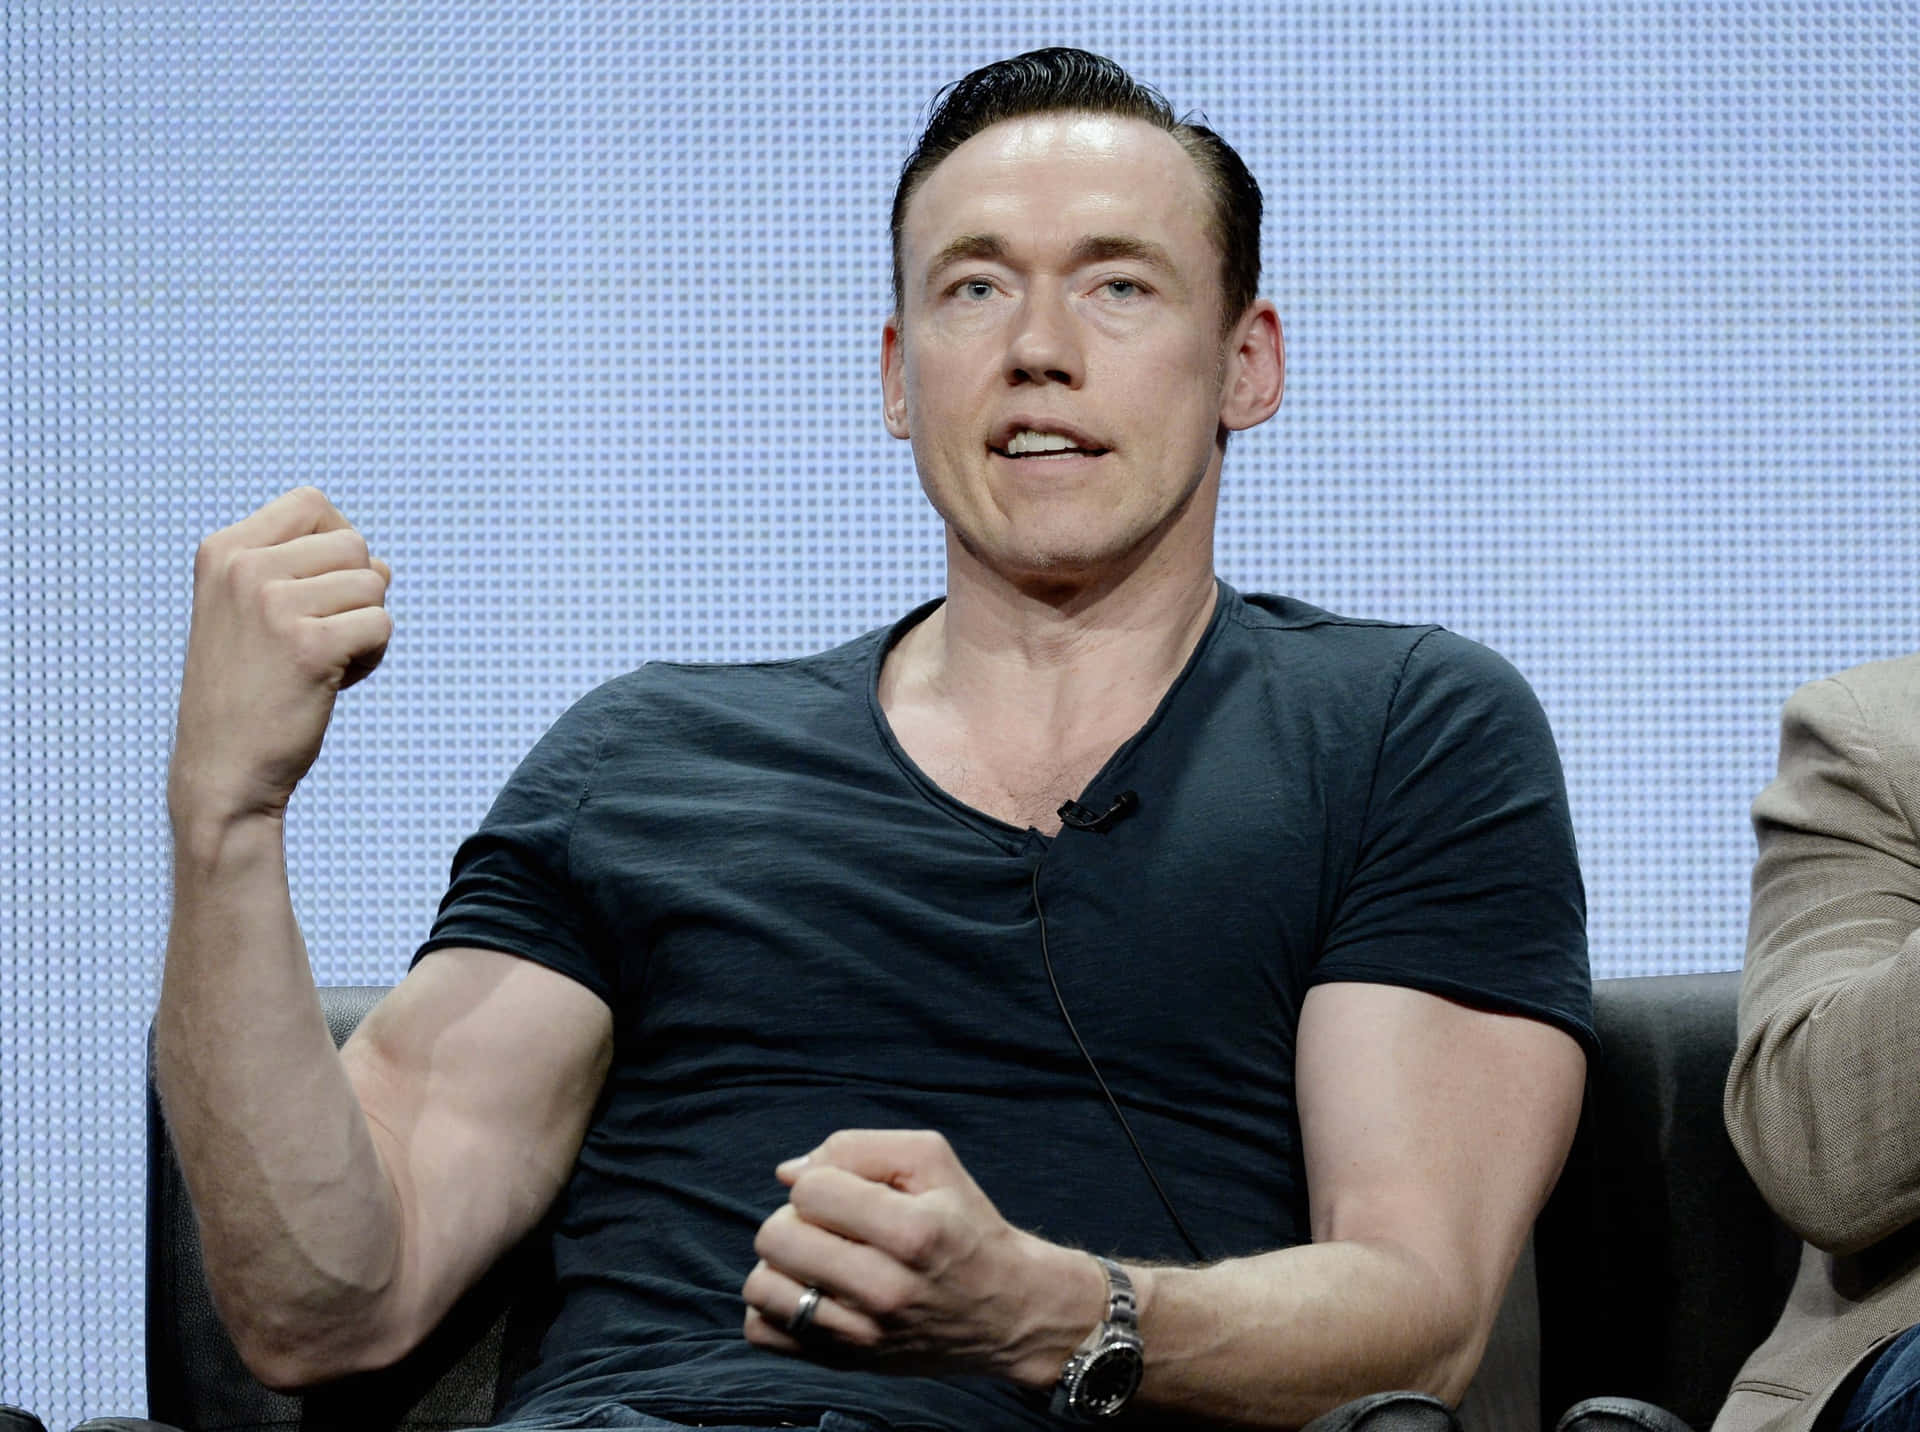 Actorkevin Durand Is Known For His Versatile Roles In Both Film And Television. With His Imposing Stature And Expressive Face, He Has Brought To Life A Wide Range Of Characters, From Heroic Warriors To Chilling Villains. Whether Portraying A Menacing Supernatural Creature In 